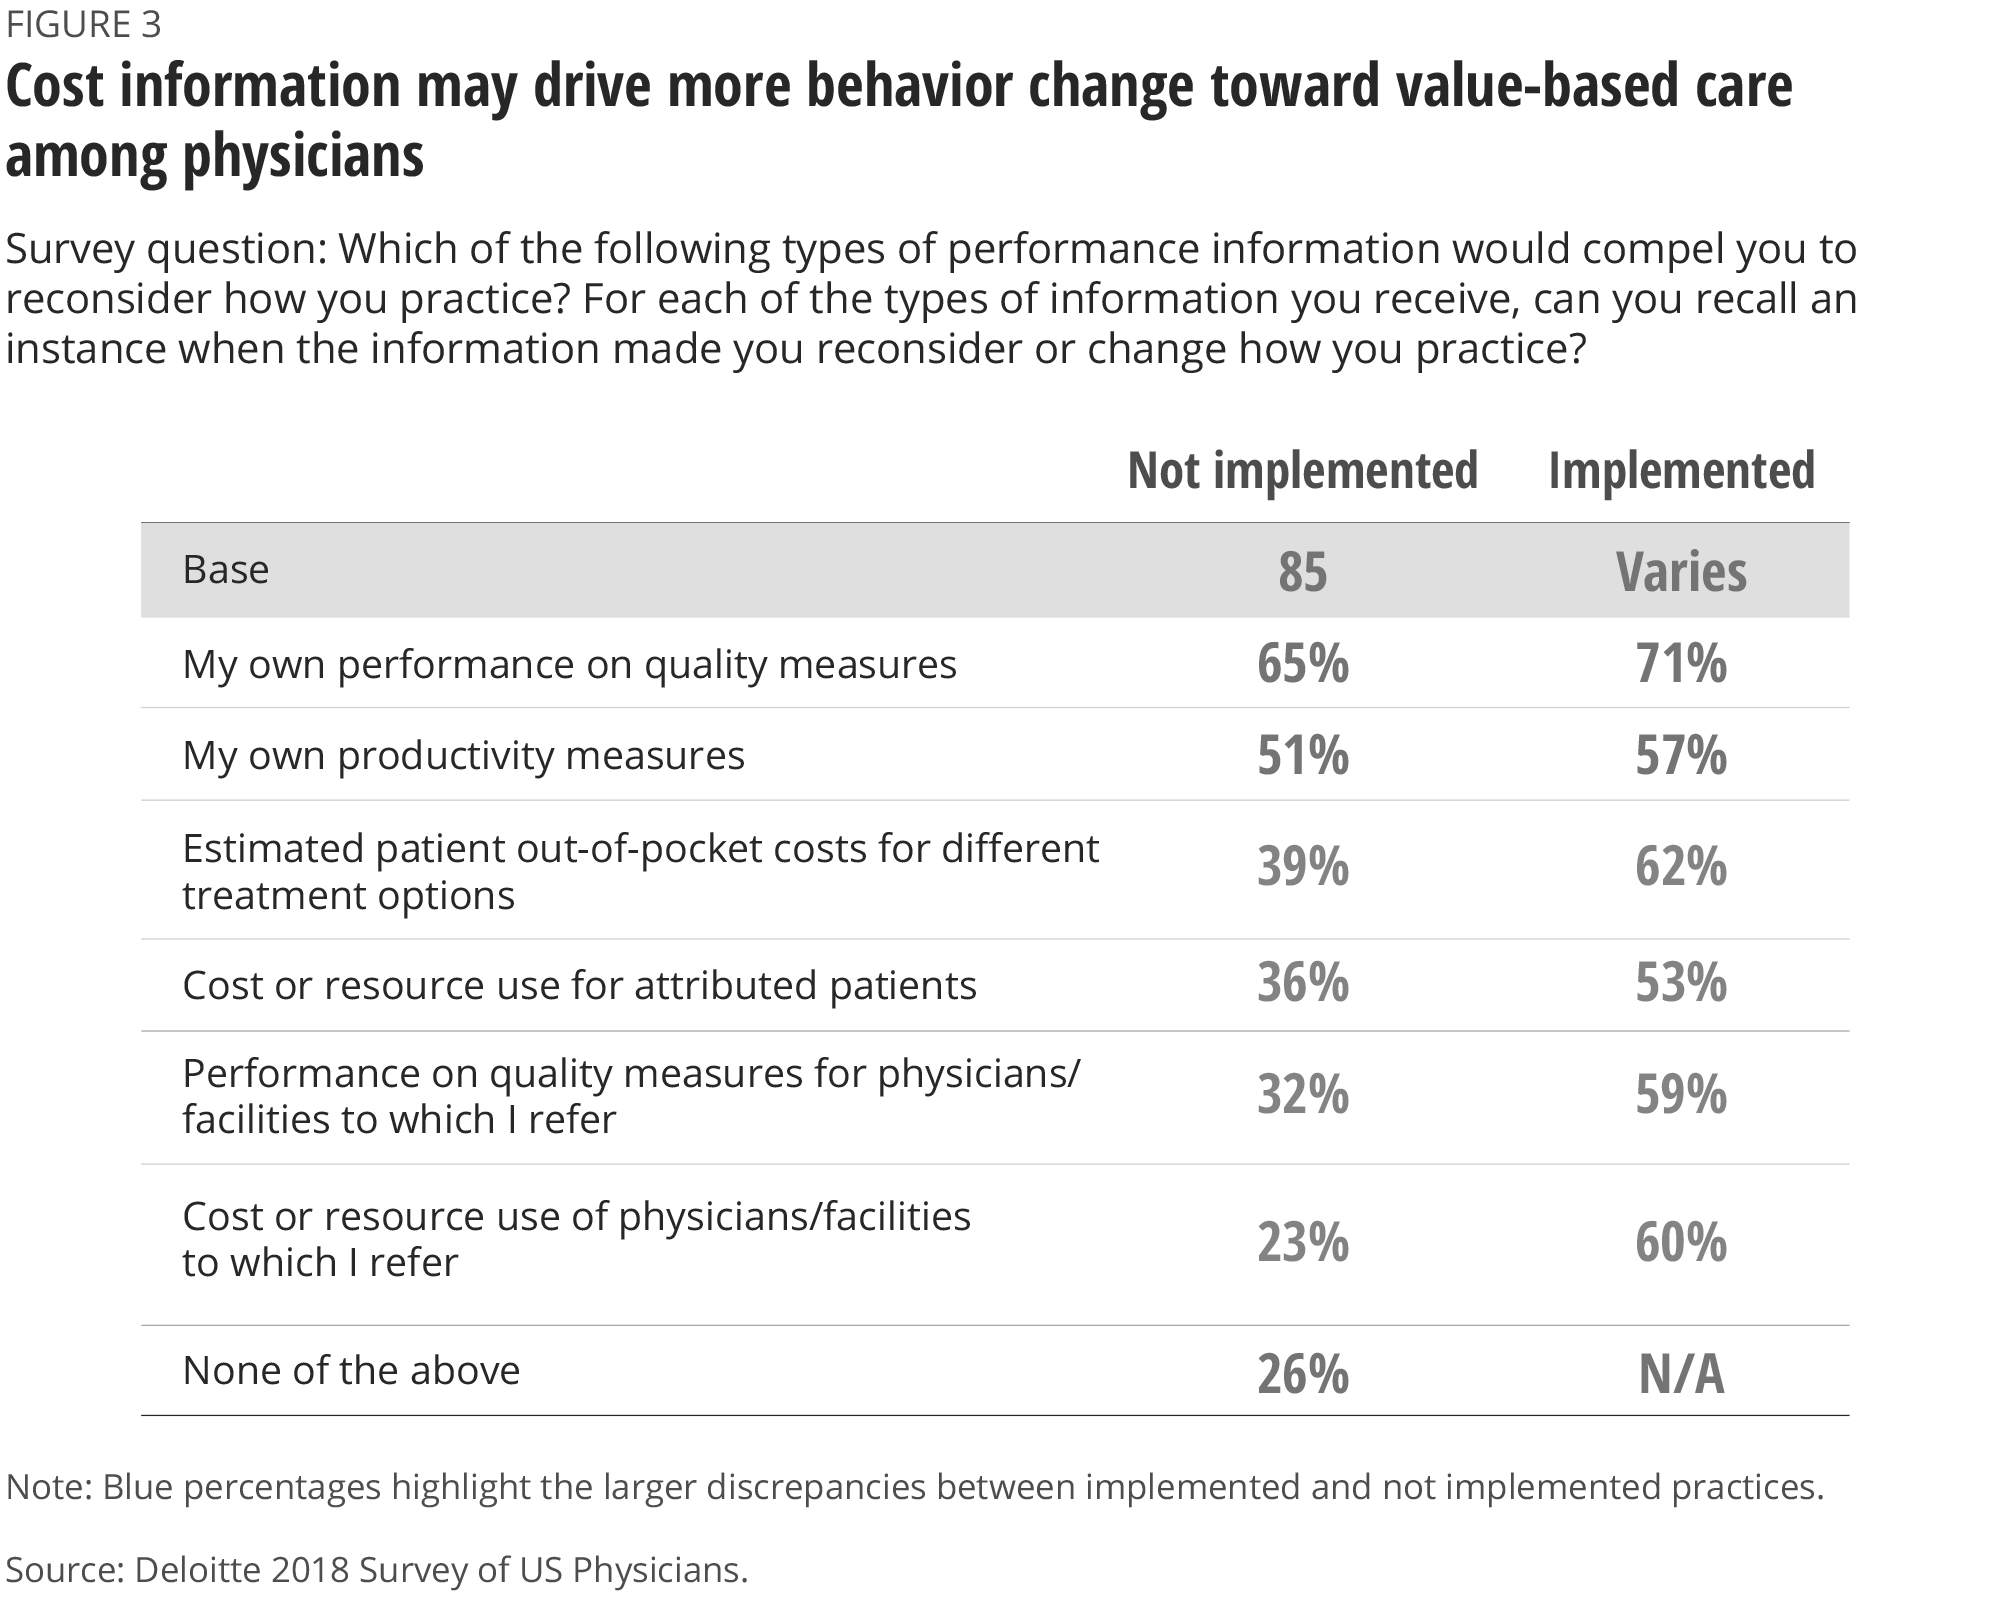 Cost information may drive behavior change toward value-based care among physicians